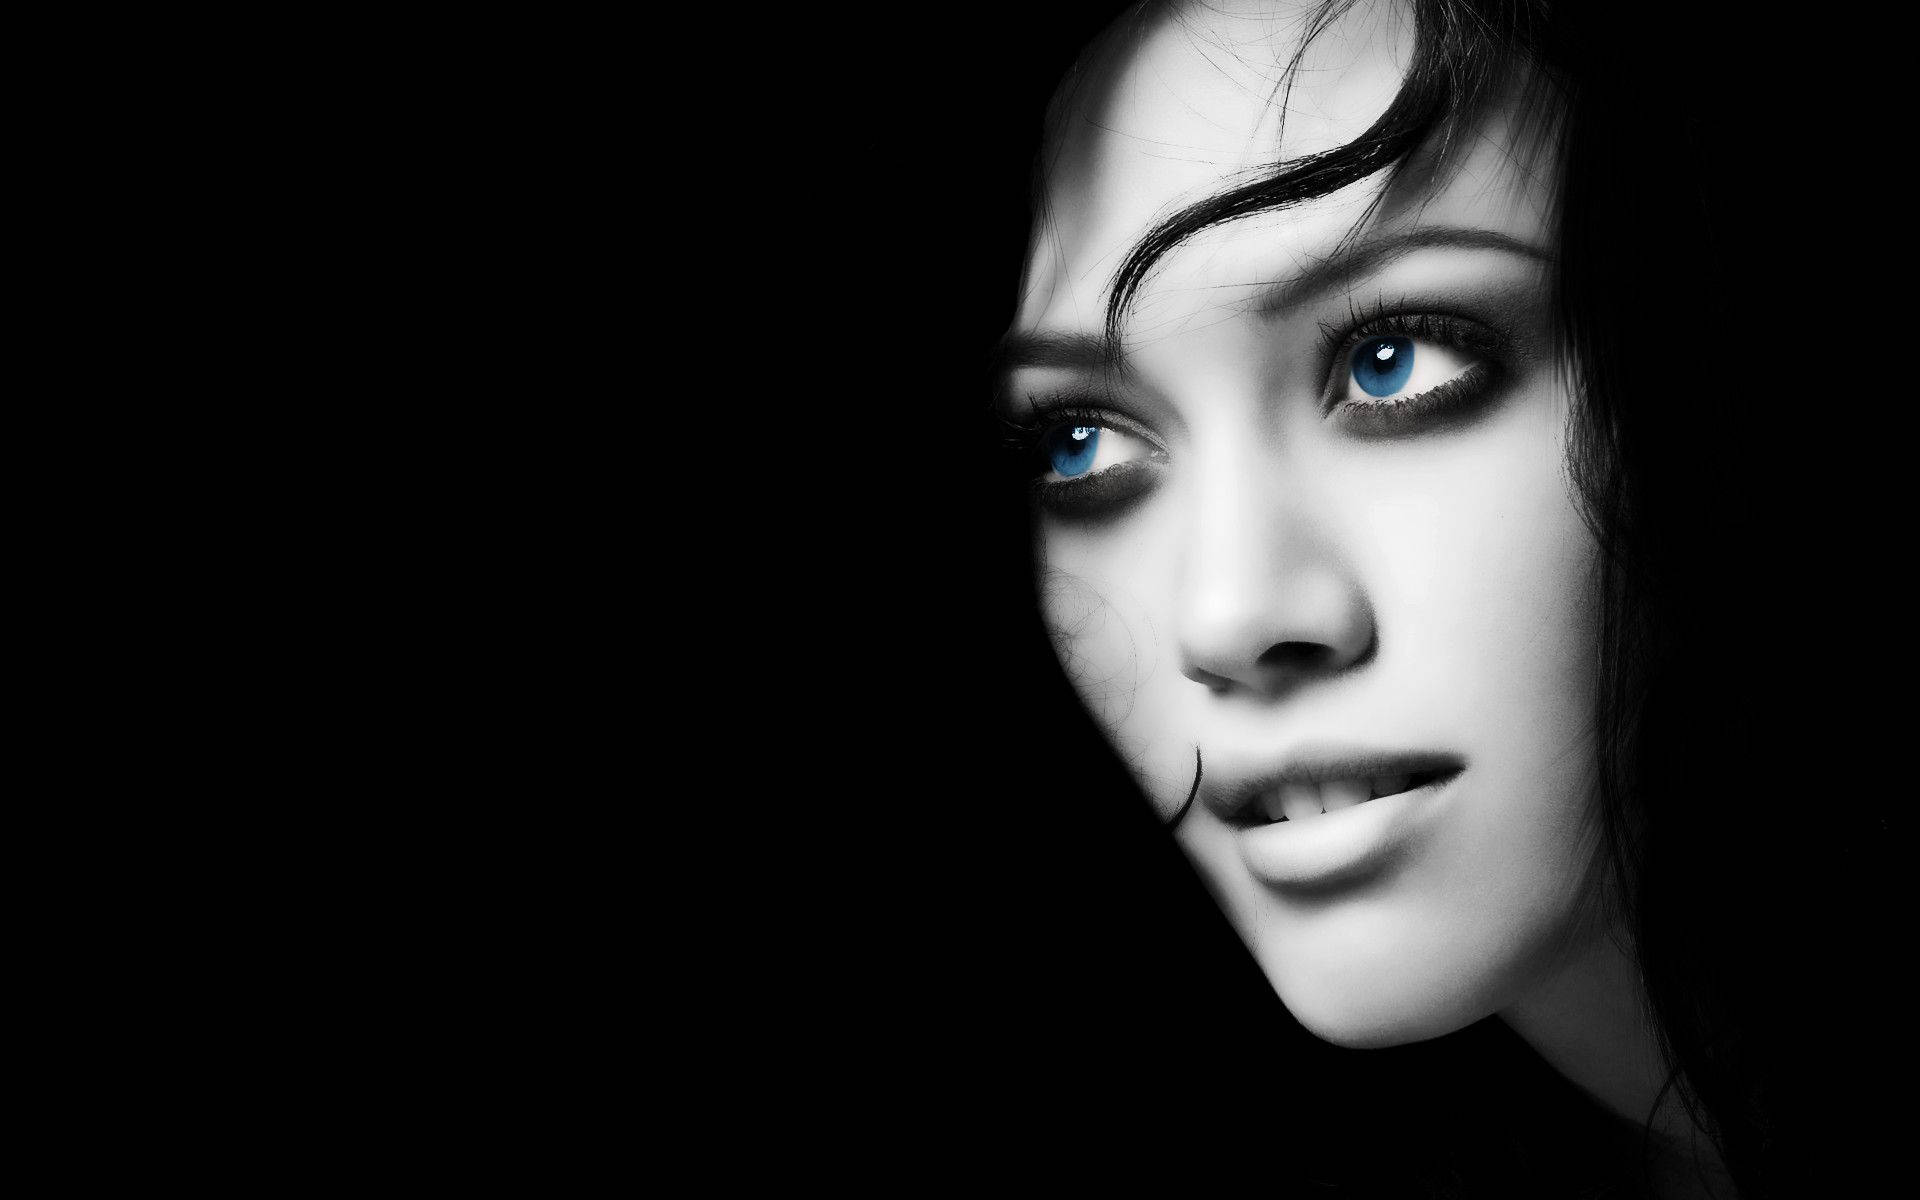 Dark Girl Looking With Blue Eyes Background